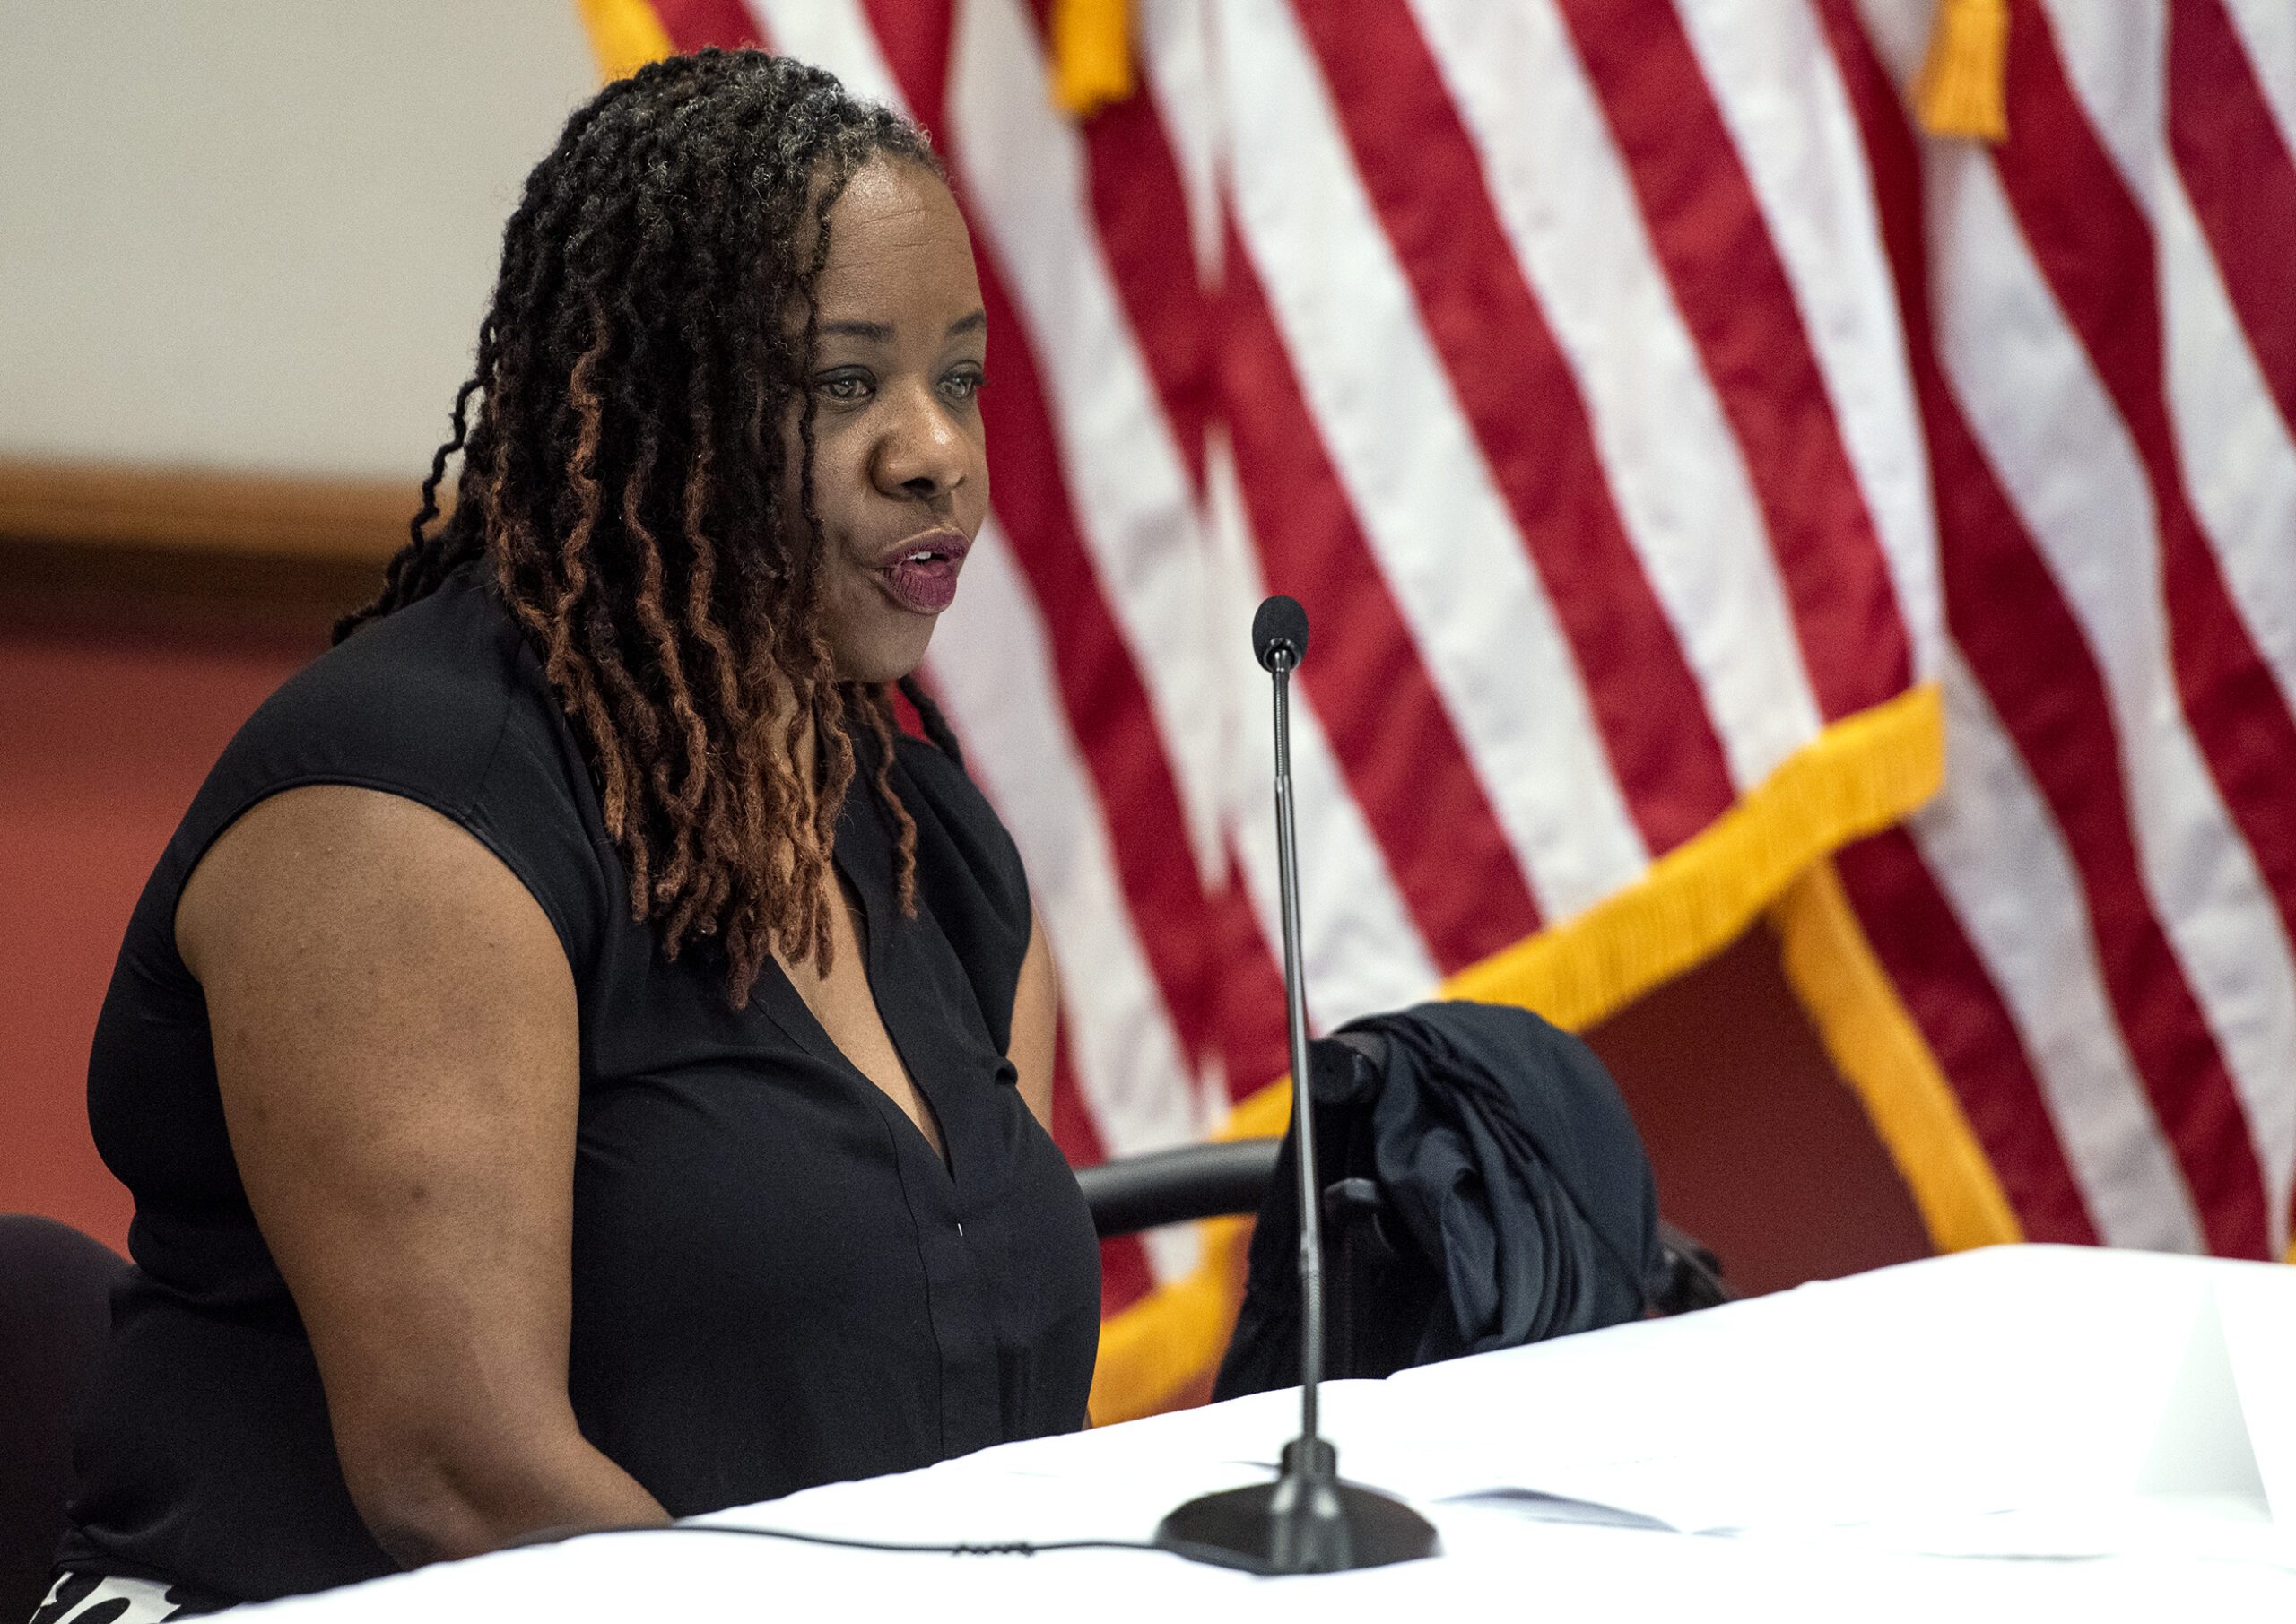 A woman sits at a table as she speaks at a press conference.